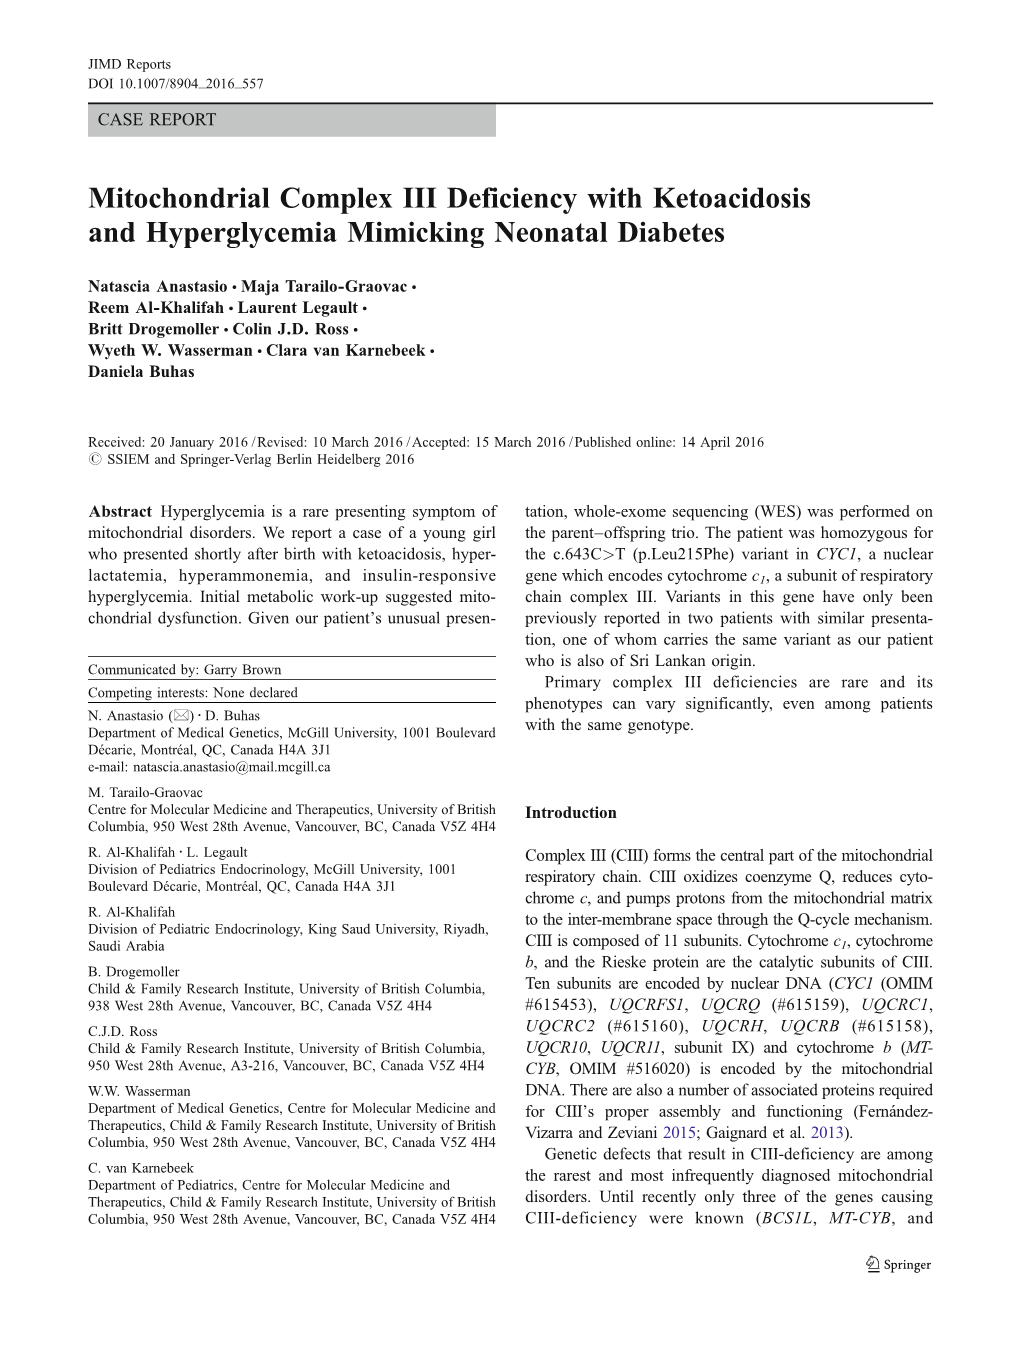 Mitochondrial Complex III Deficiency with Ketoacidosis and Hyperglycemia Mimicking Neonatal Diabetes